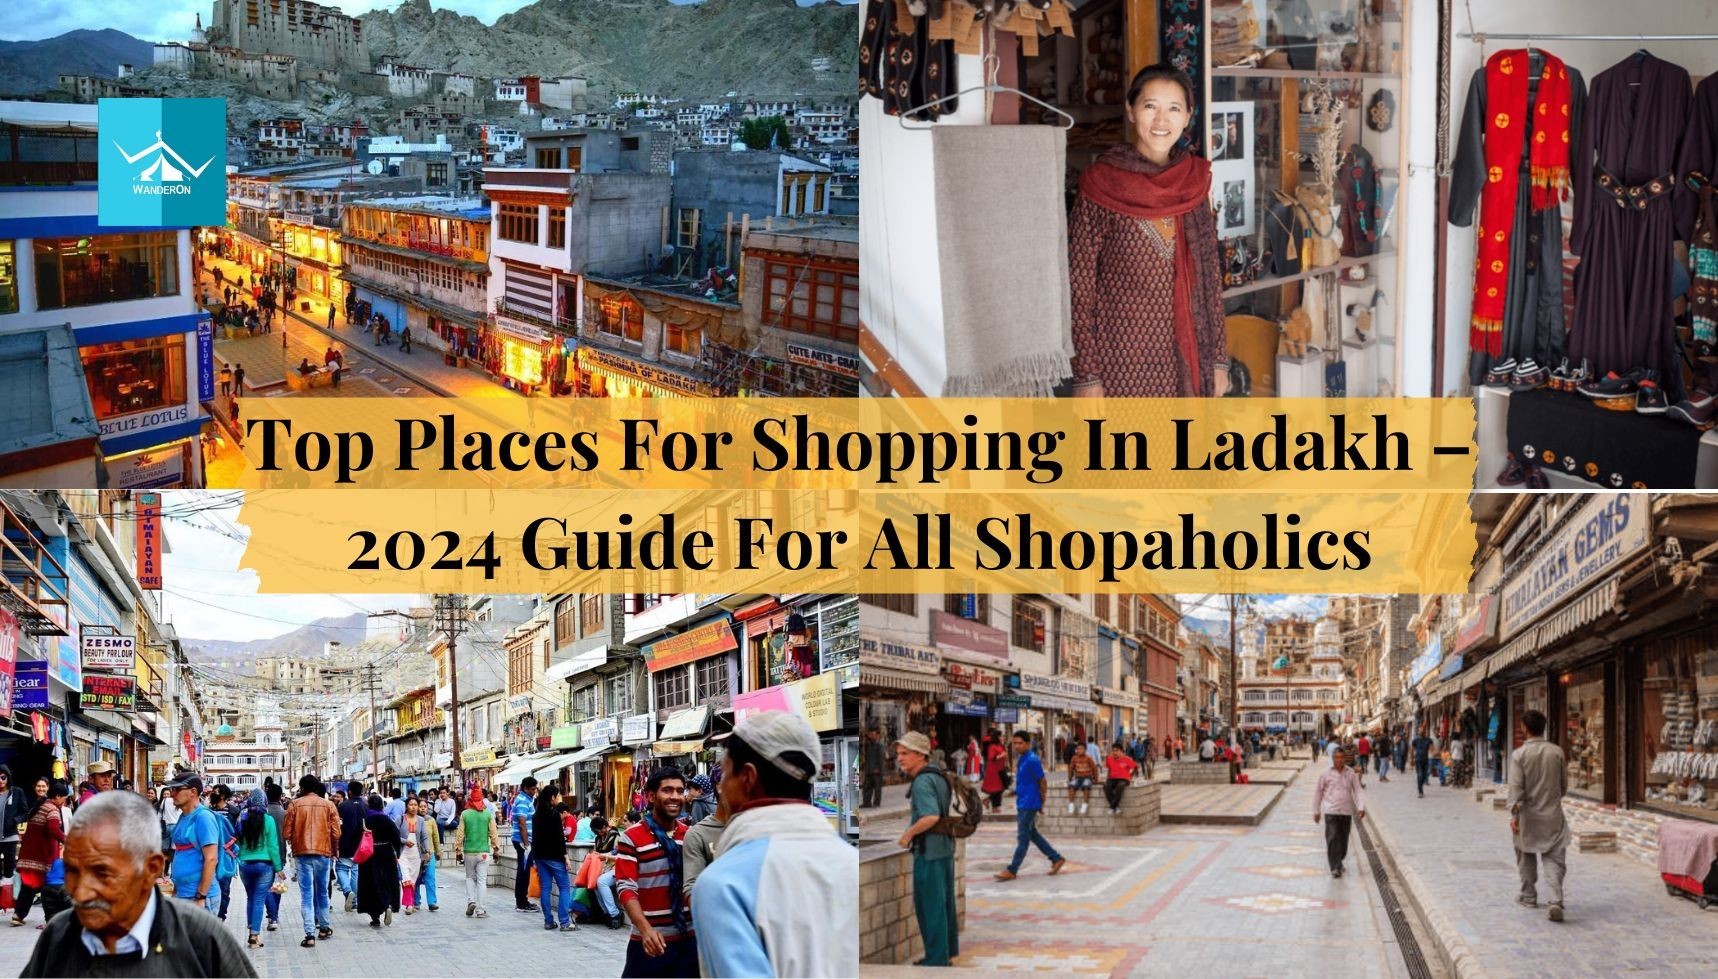 Top Places For Shopping In Ladakh – 2024 Guide For All Shopaholics